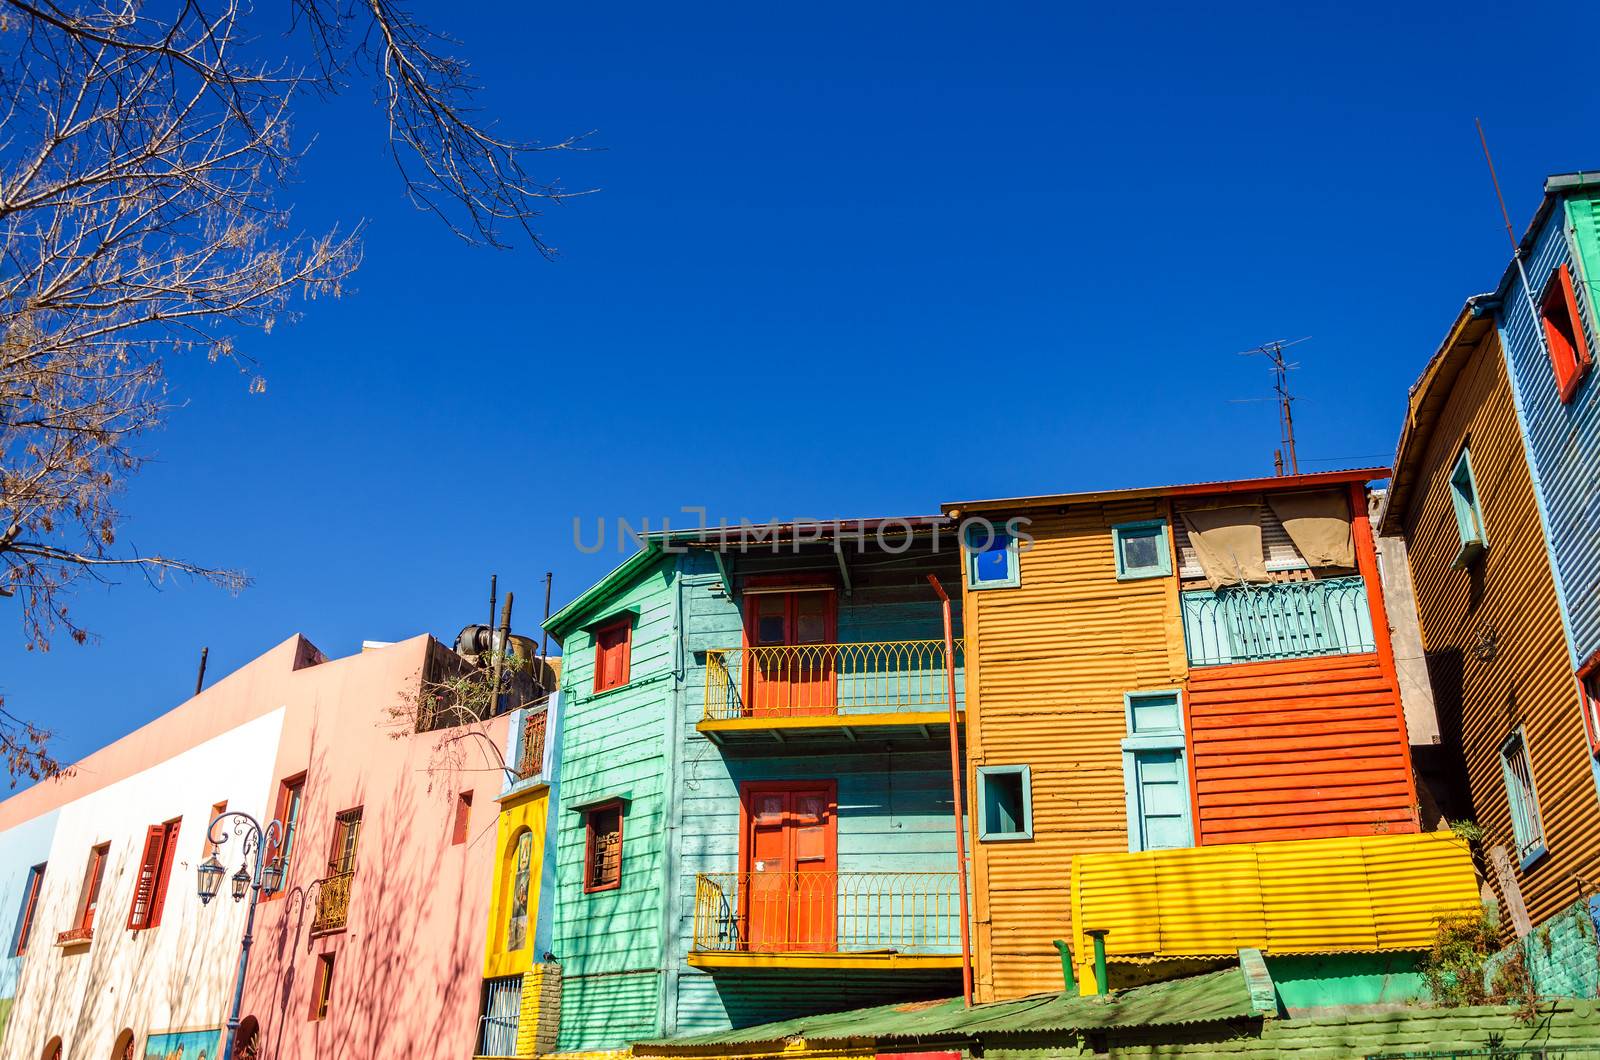 Brightly painted buildings in La Boca neighborhood of Buenos Aires, the birthplace of Tango